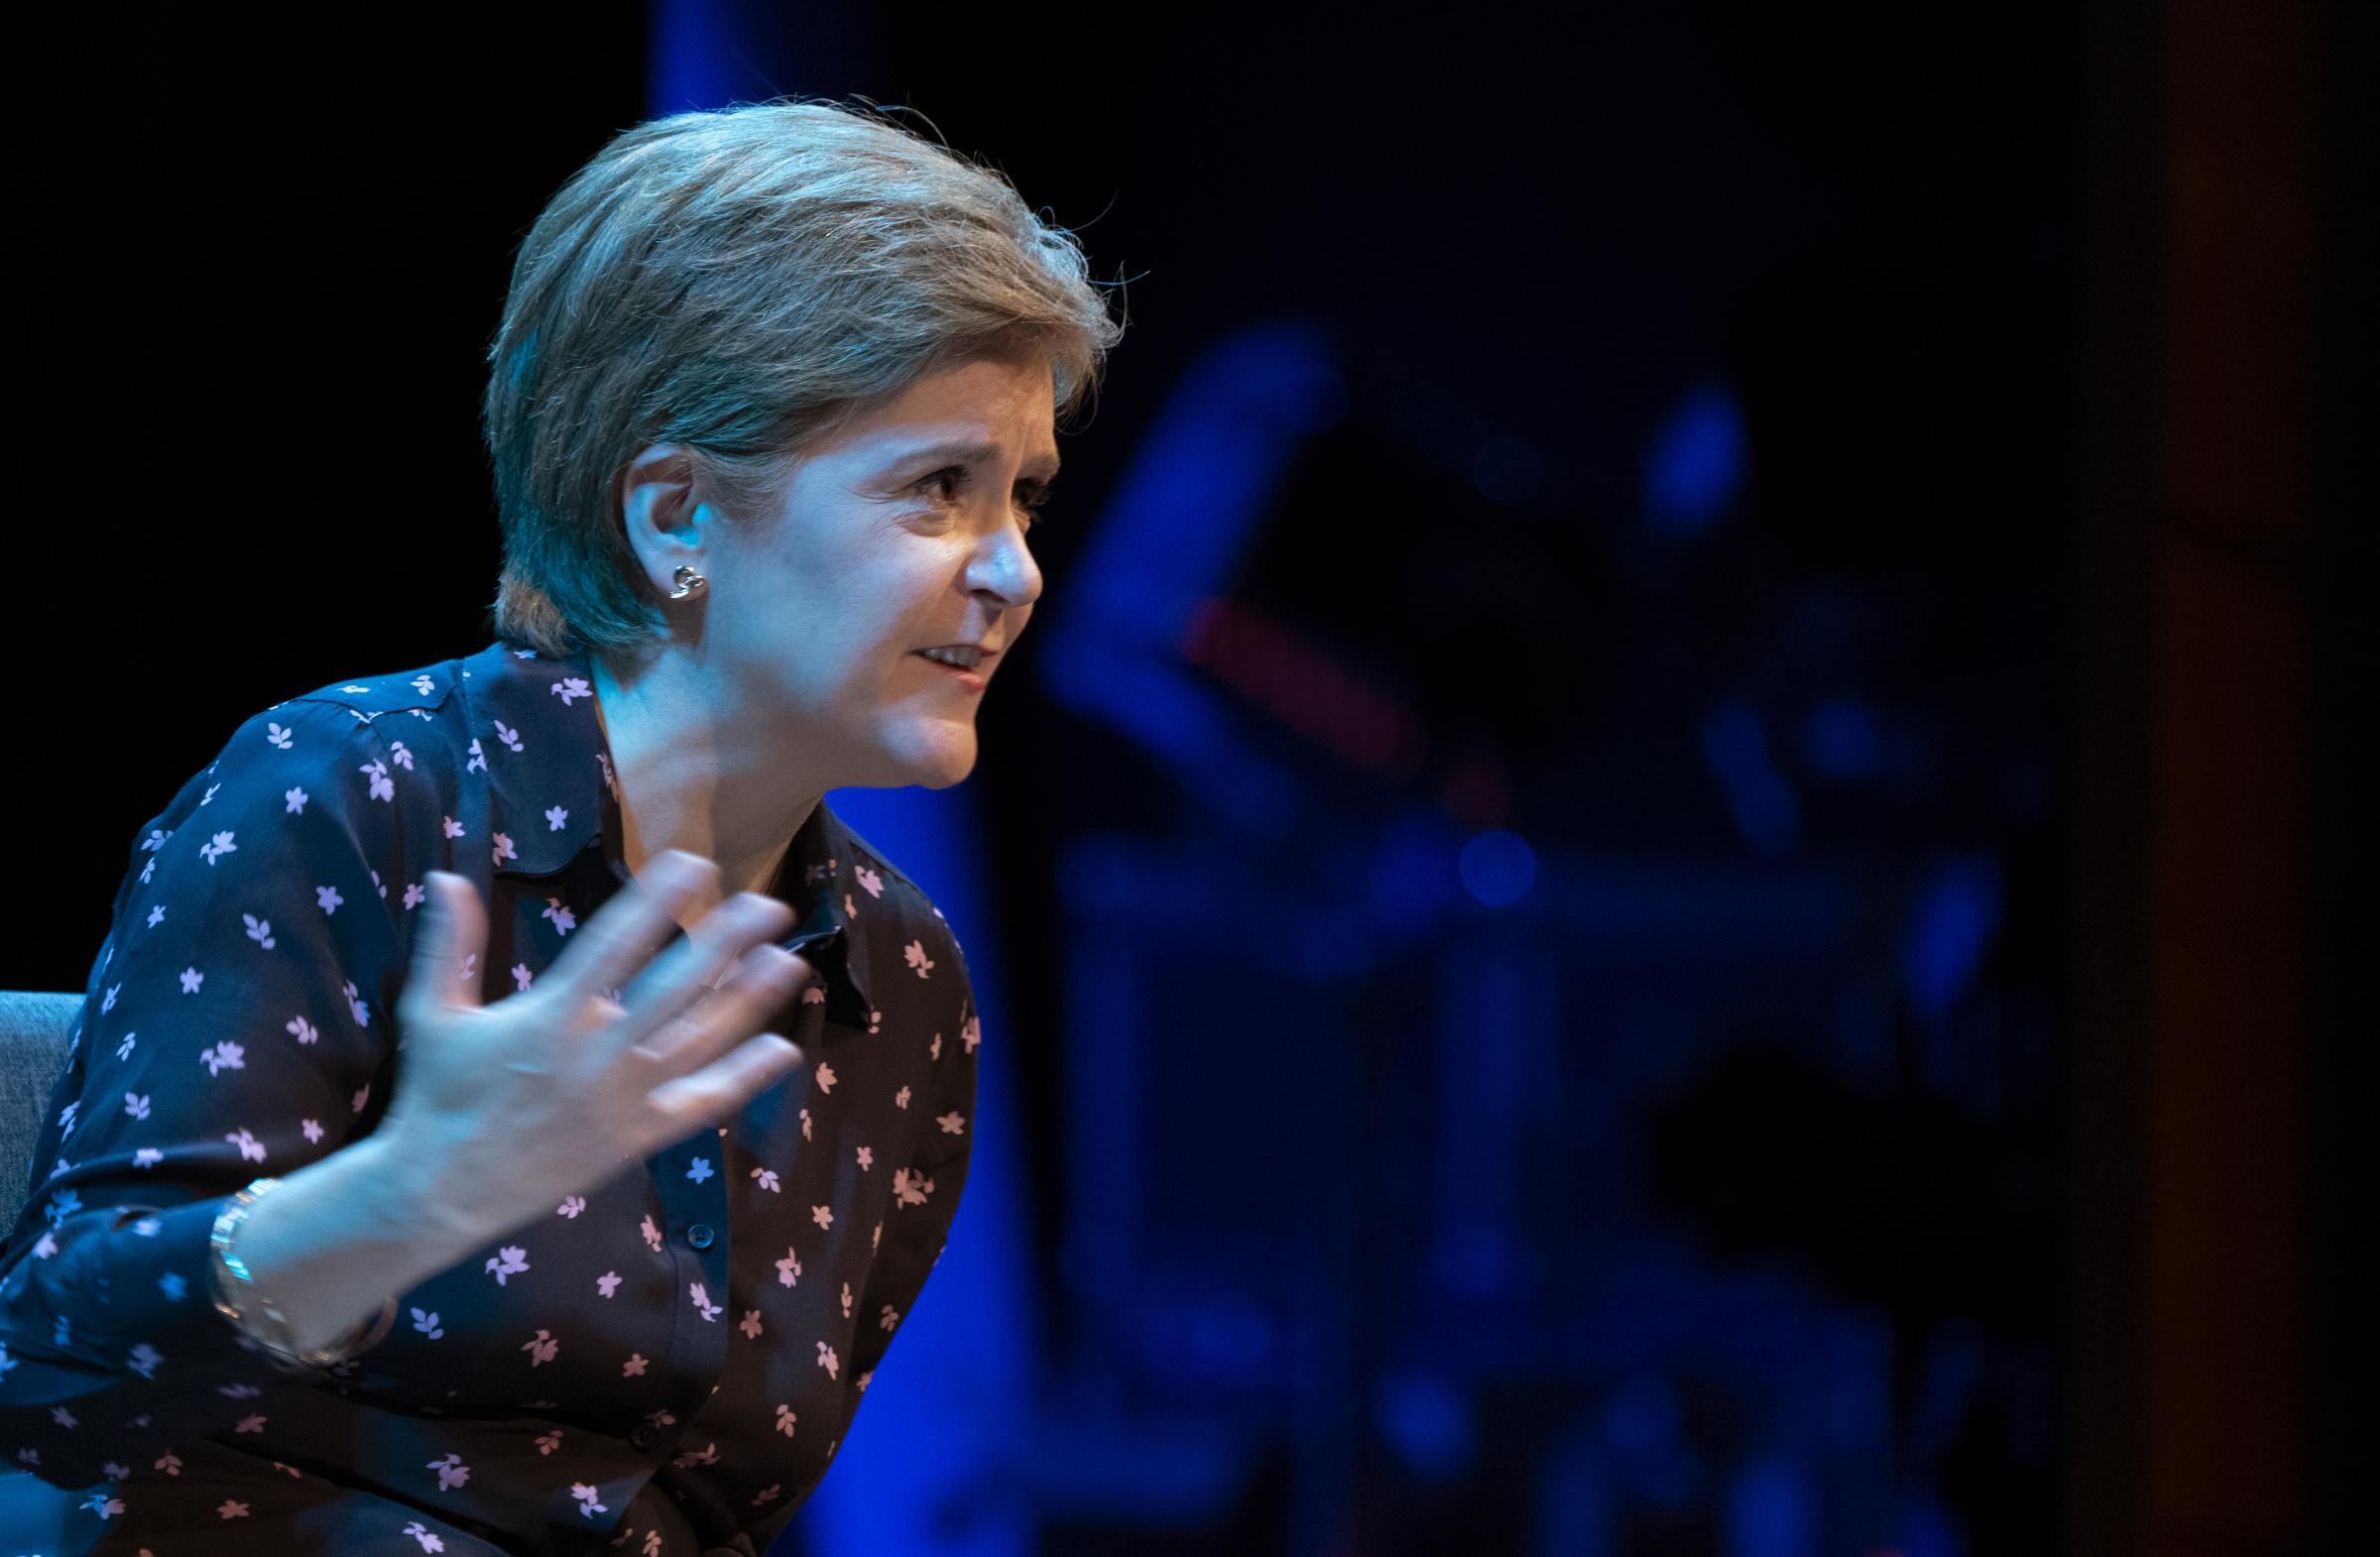 Nicola Sturgeon says she may not lead SNP into next Holyrood election